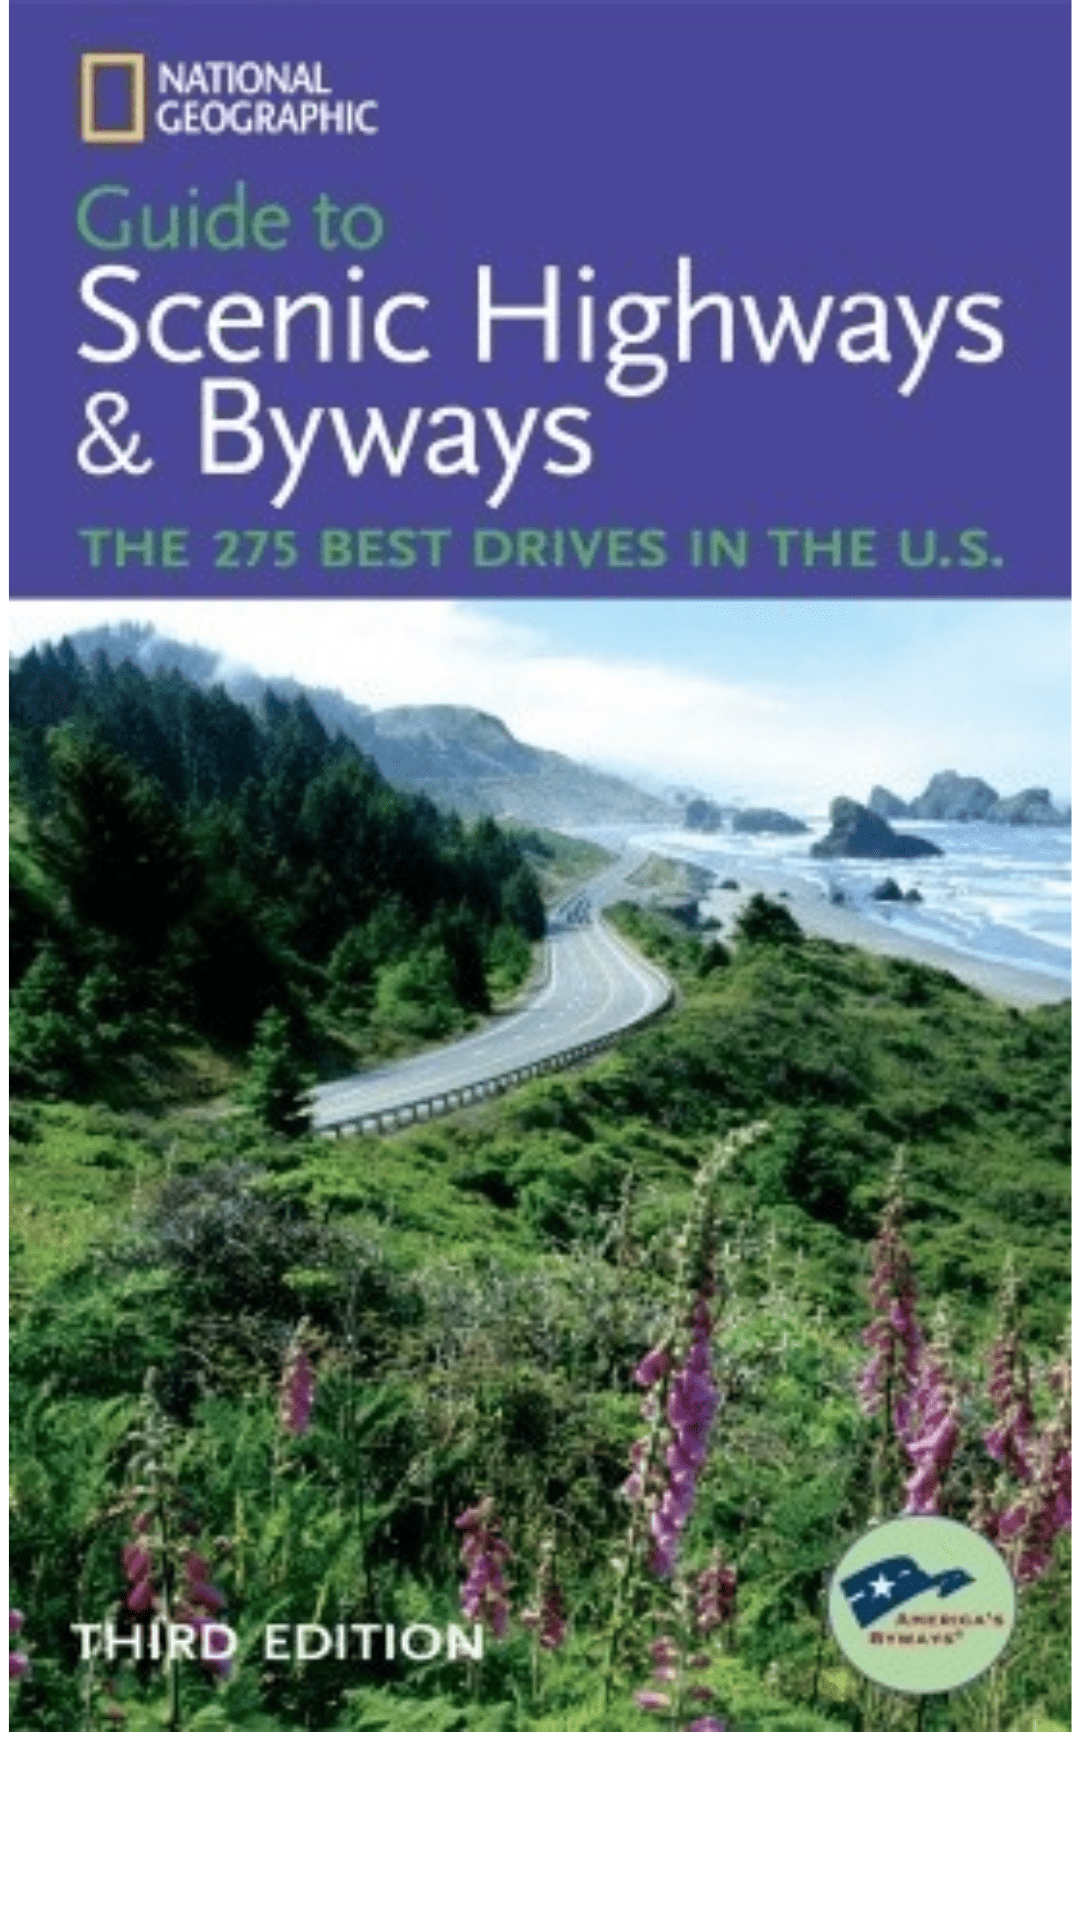 Guide to Scenic Highways and Byways